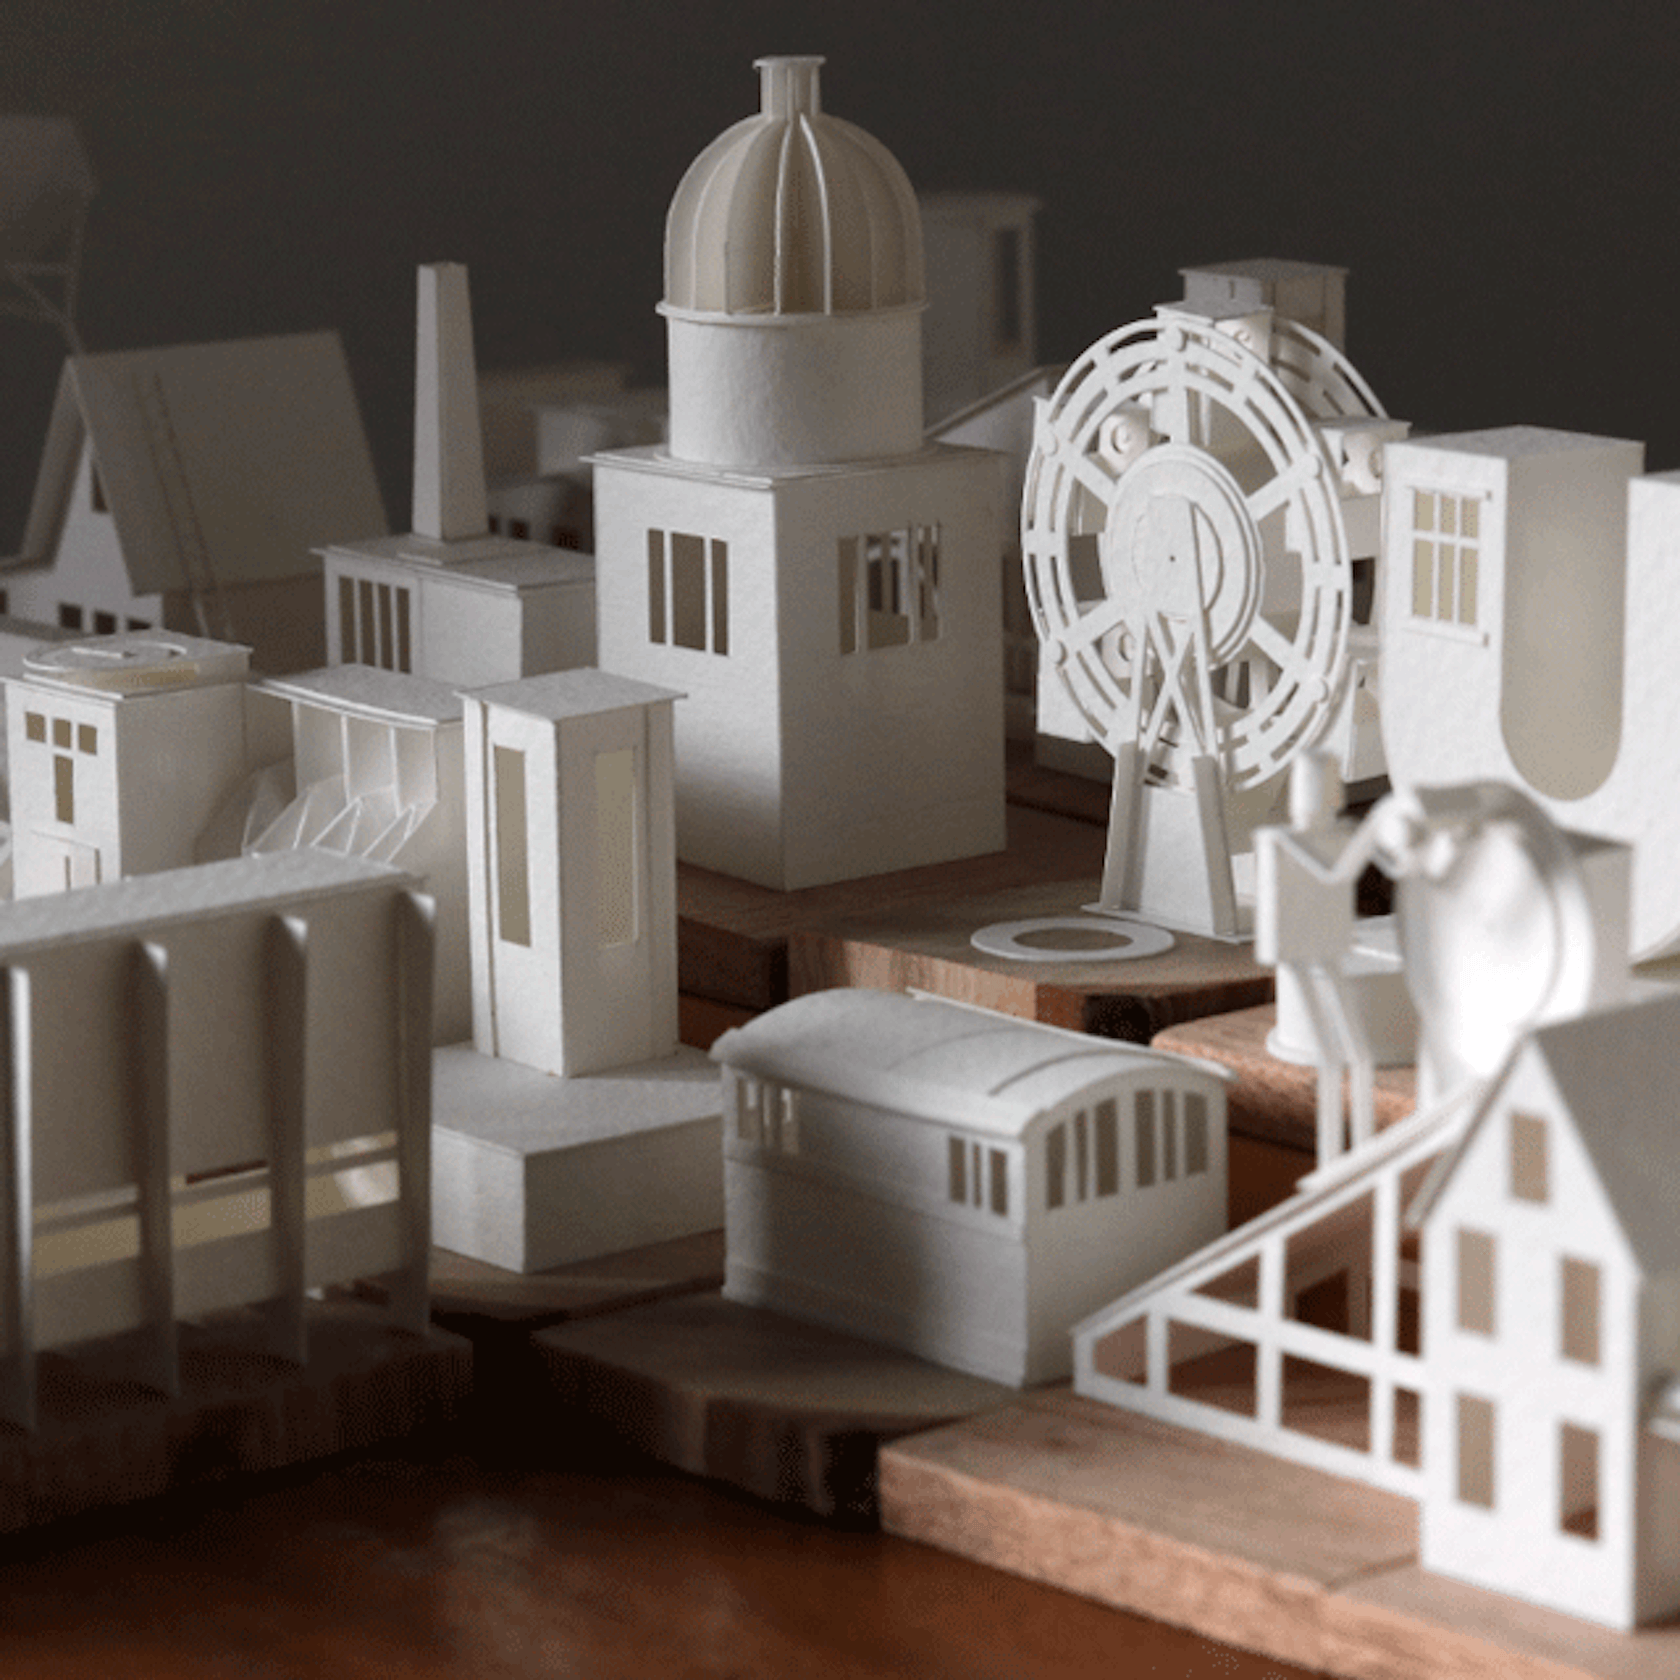 See A Tiny City Of 635 Architecture Models — Crafted Entirely From Paper Architizer Journal